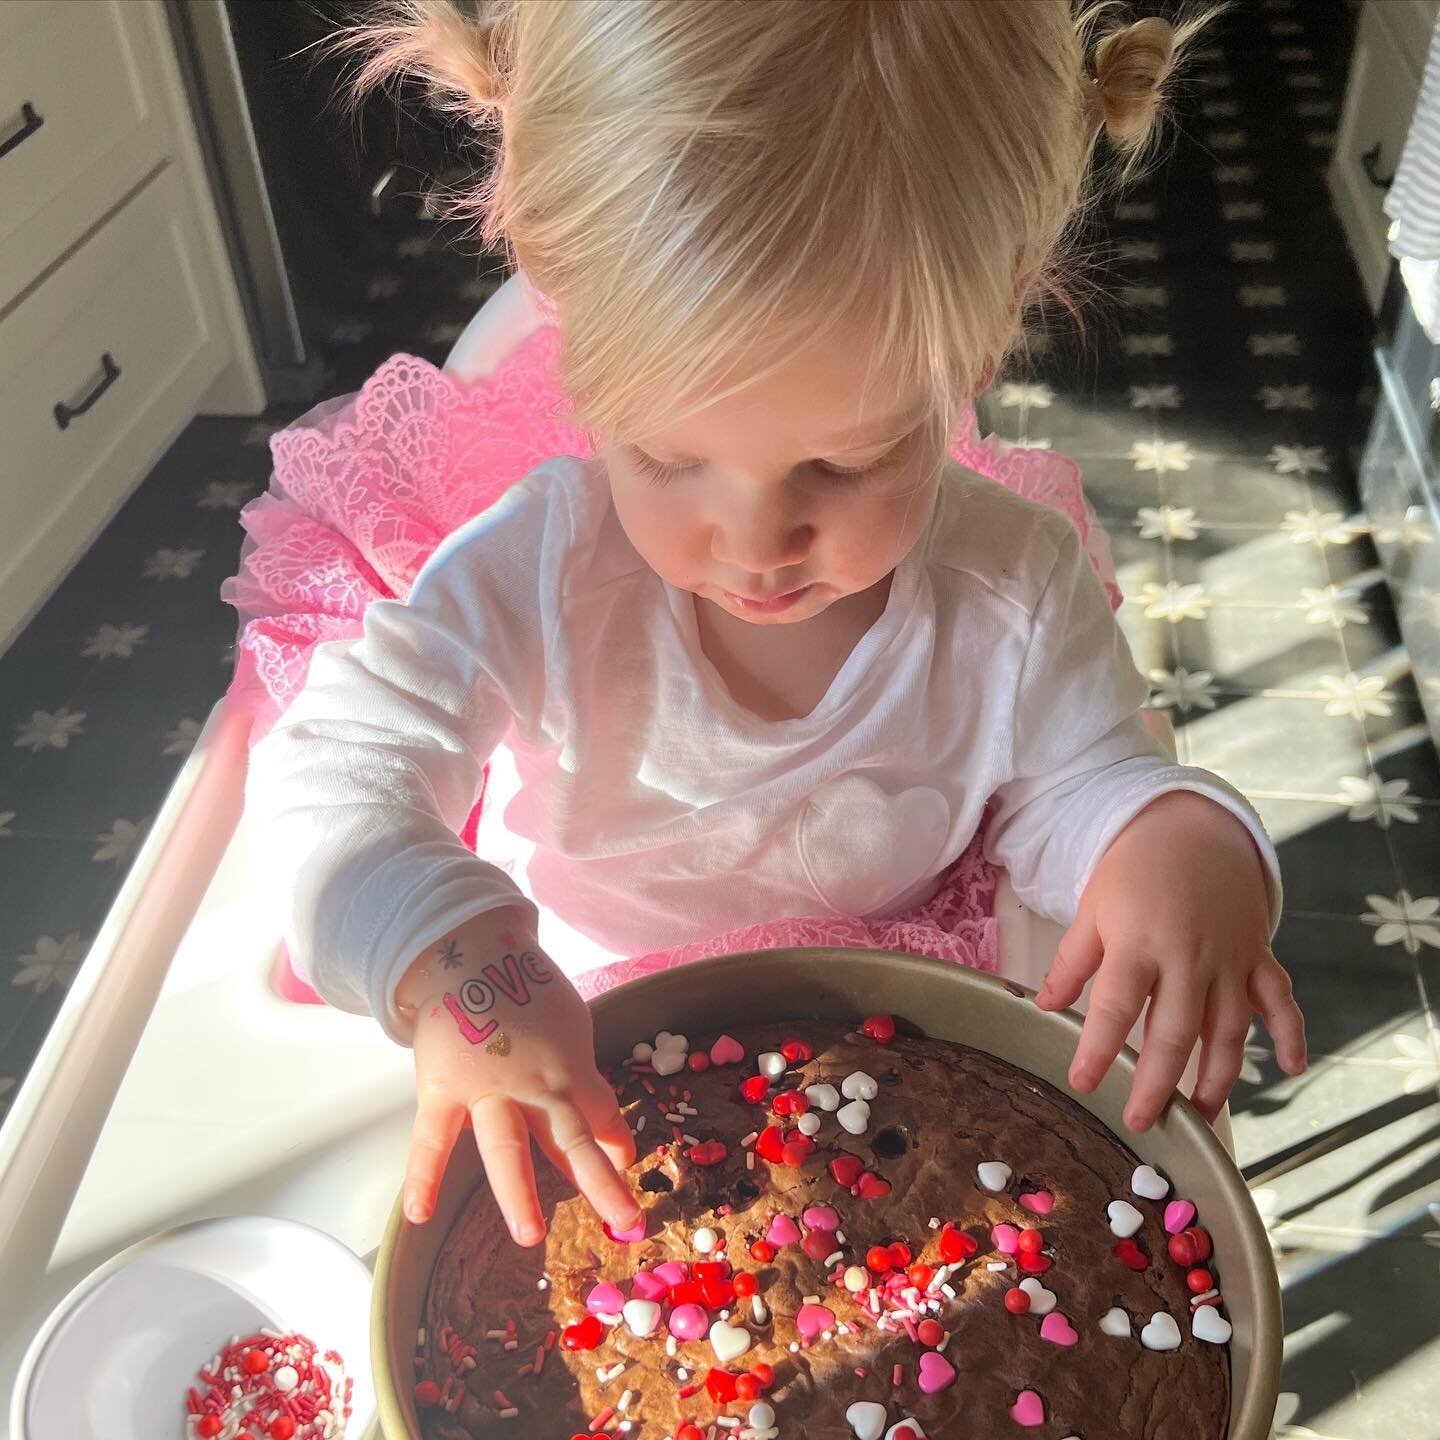 My Valentine decorating brownies for daddy!💕